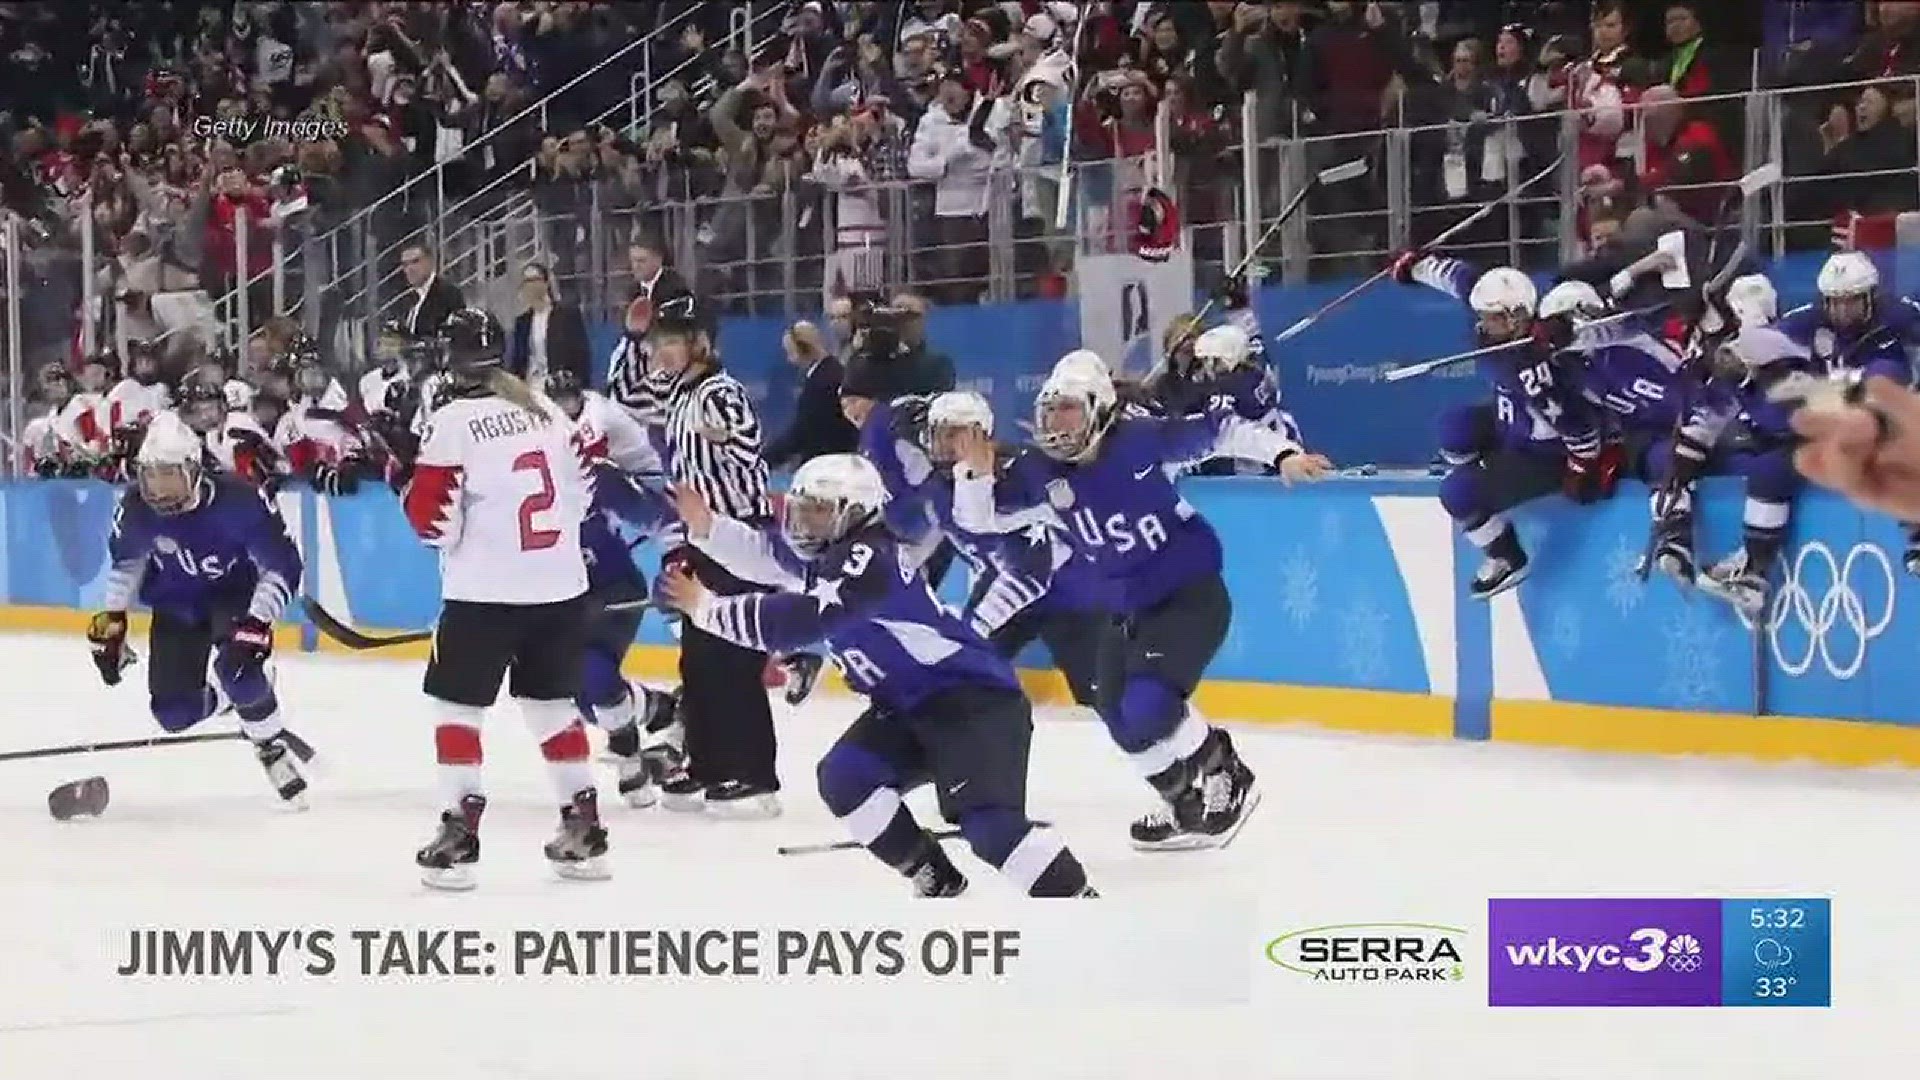 Jimmy's Take: Patience pays off for Team USA women's hockey team